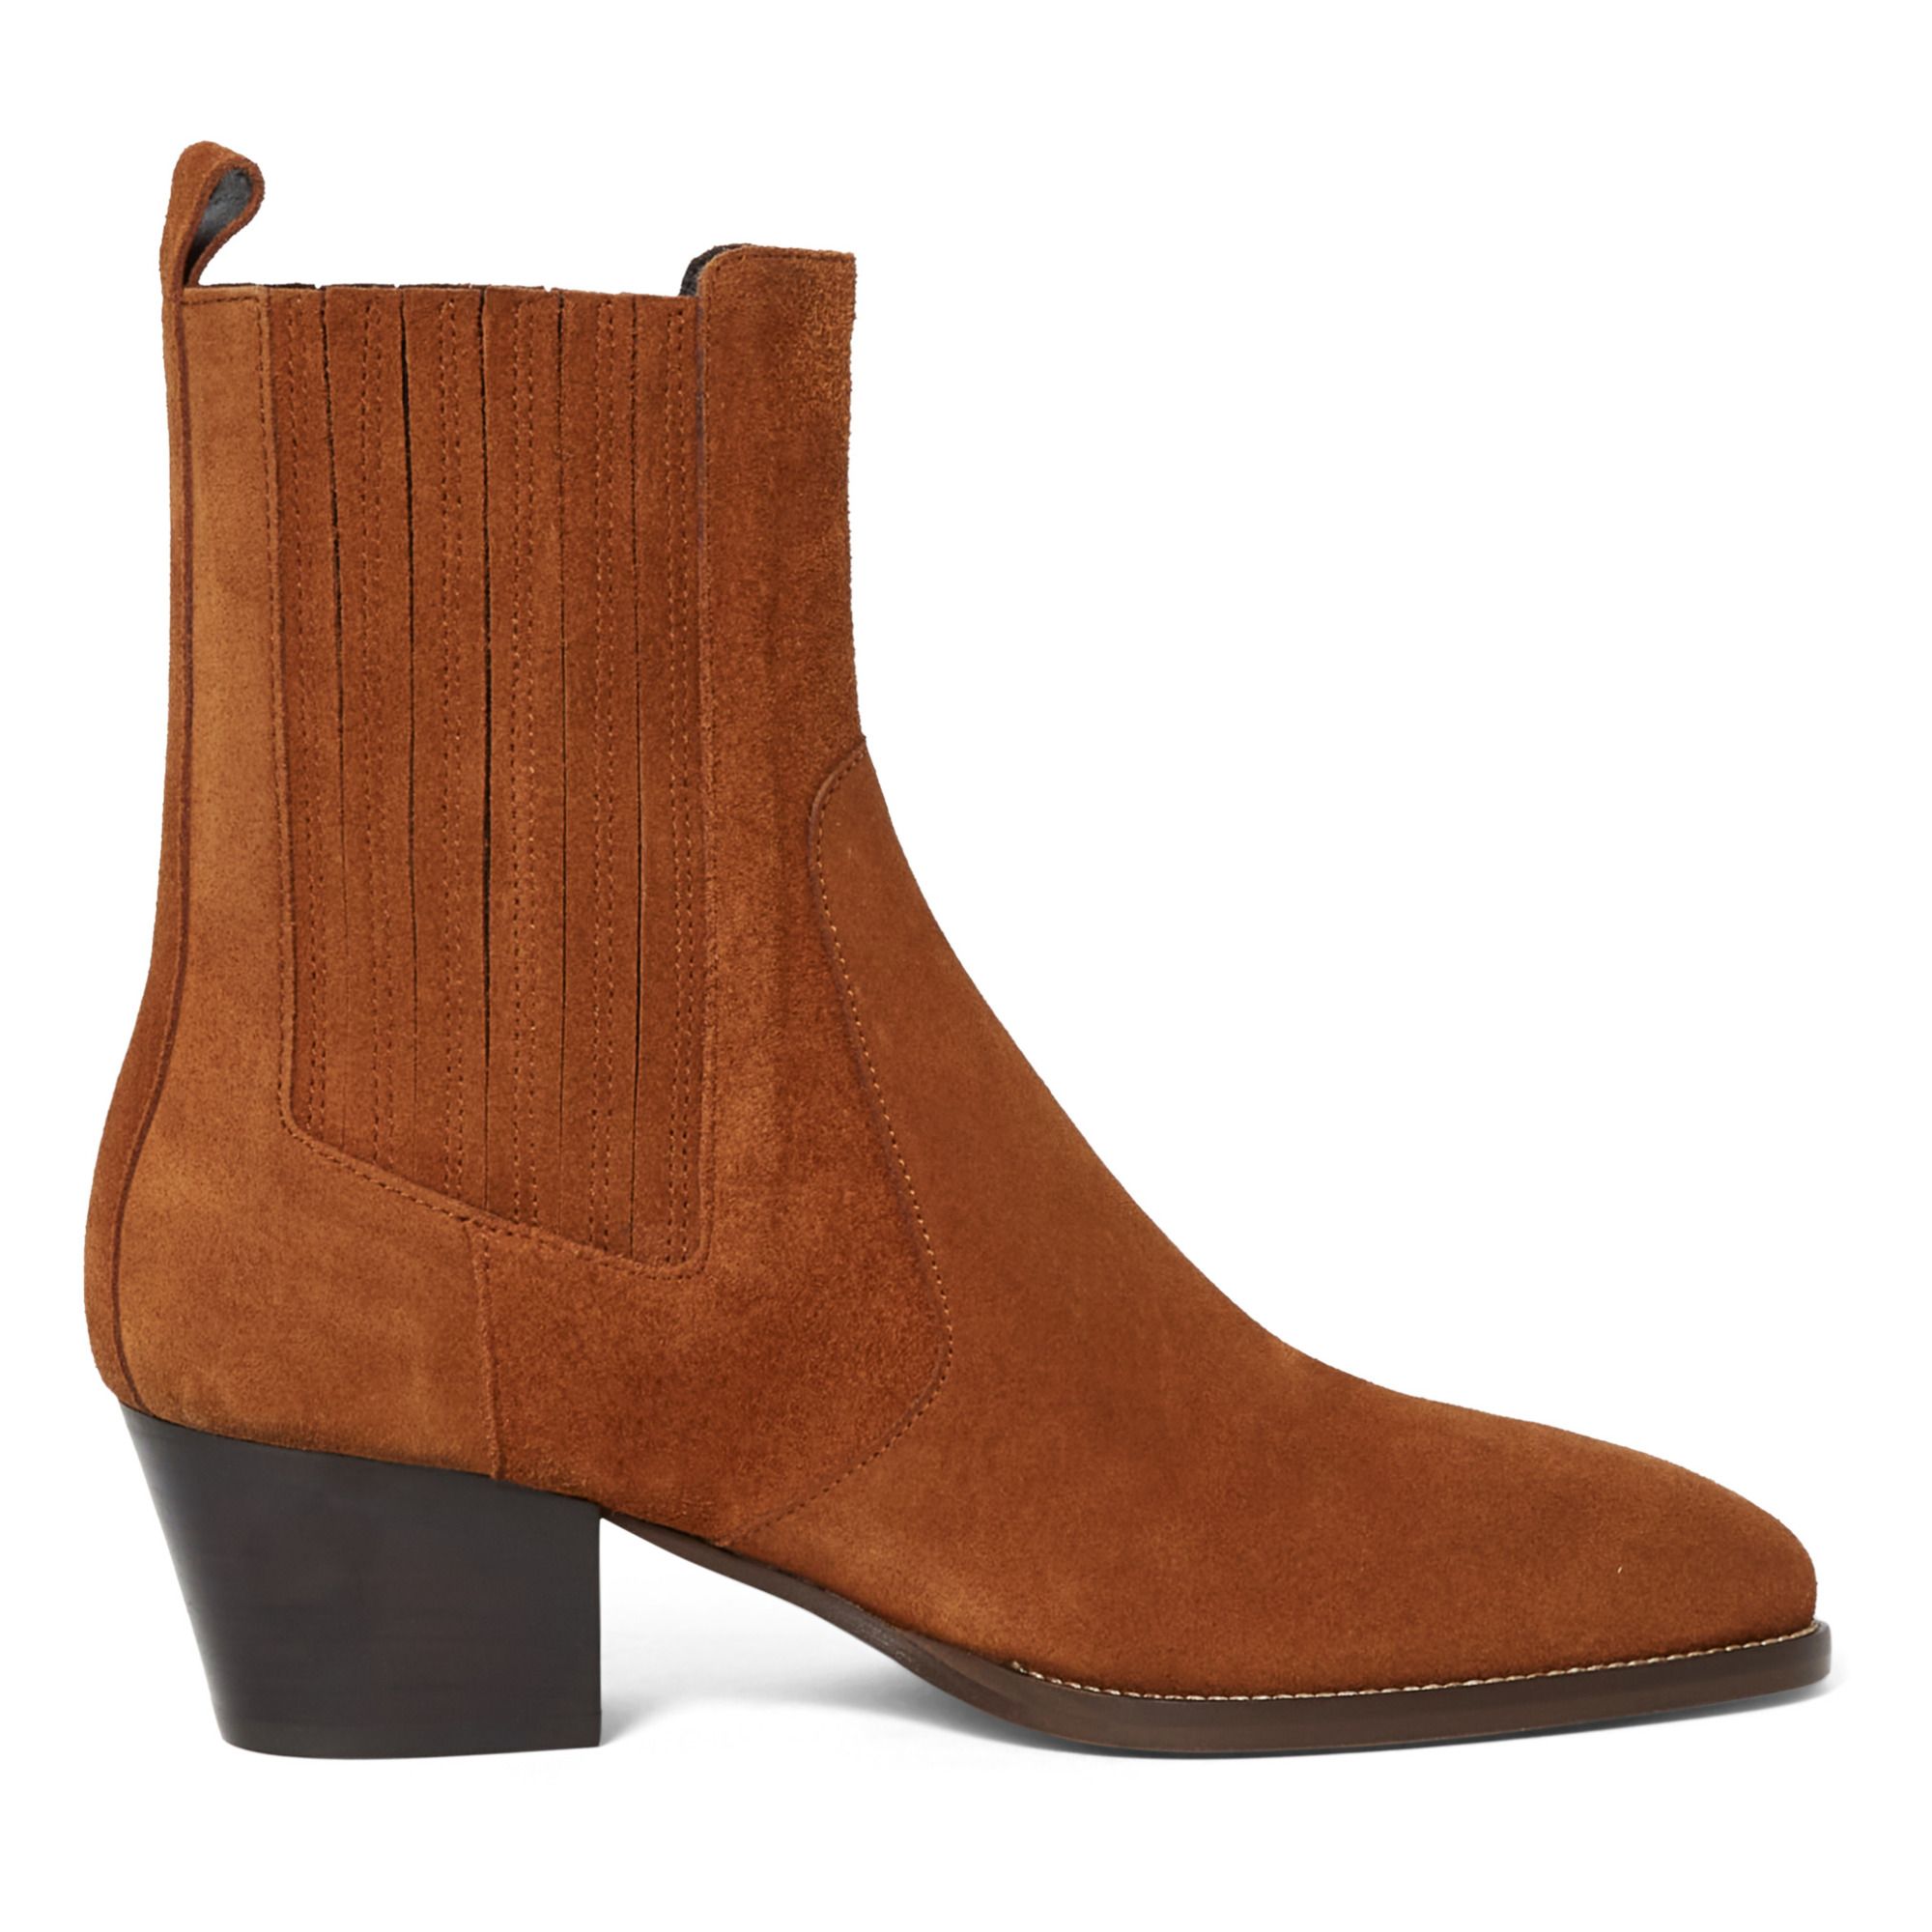 Roseanna - Boots Mania Cuir Suede - Femme - Whisky